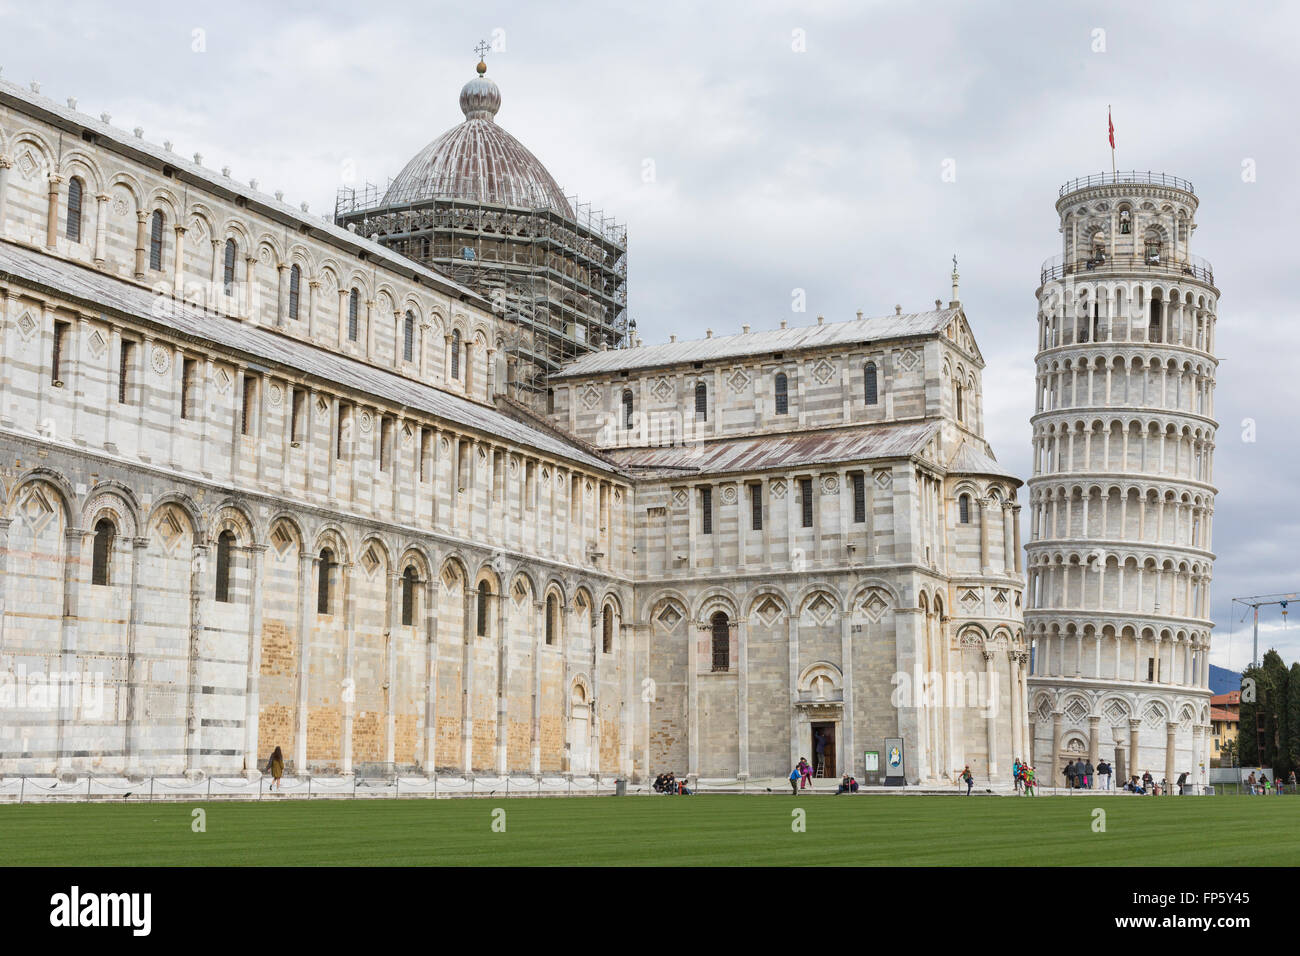 PIZA, ITALY - 10 MARCH, 2016: View of Leaning tower and the Basilica, Piazza dei miracoli, Pisa, Italy Stock Photo